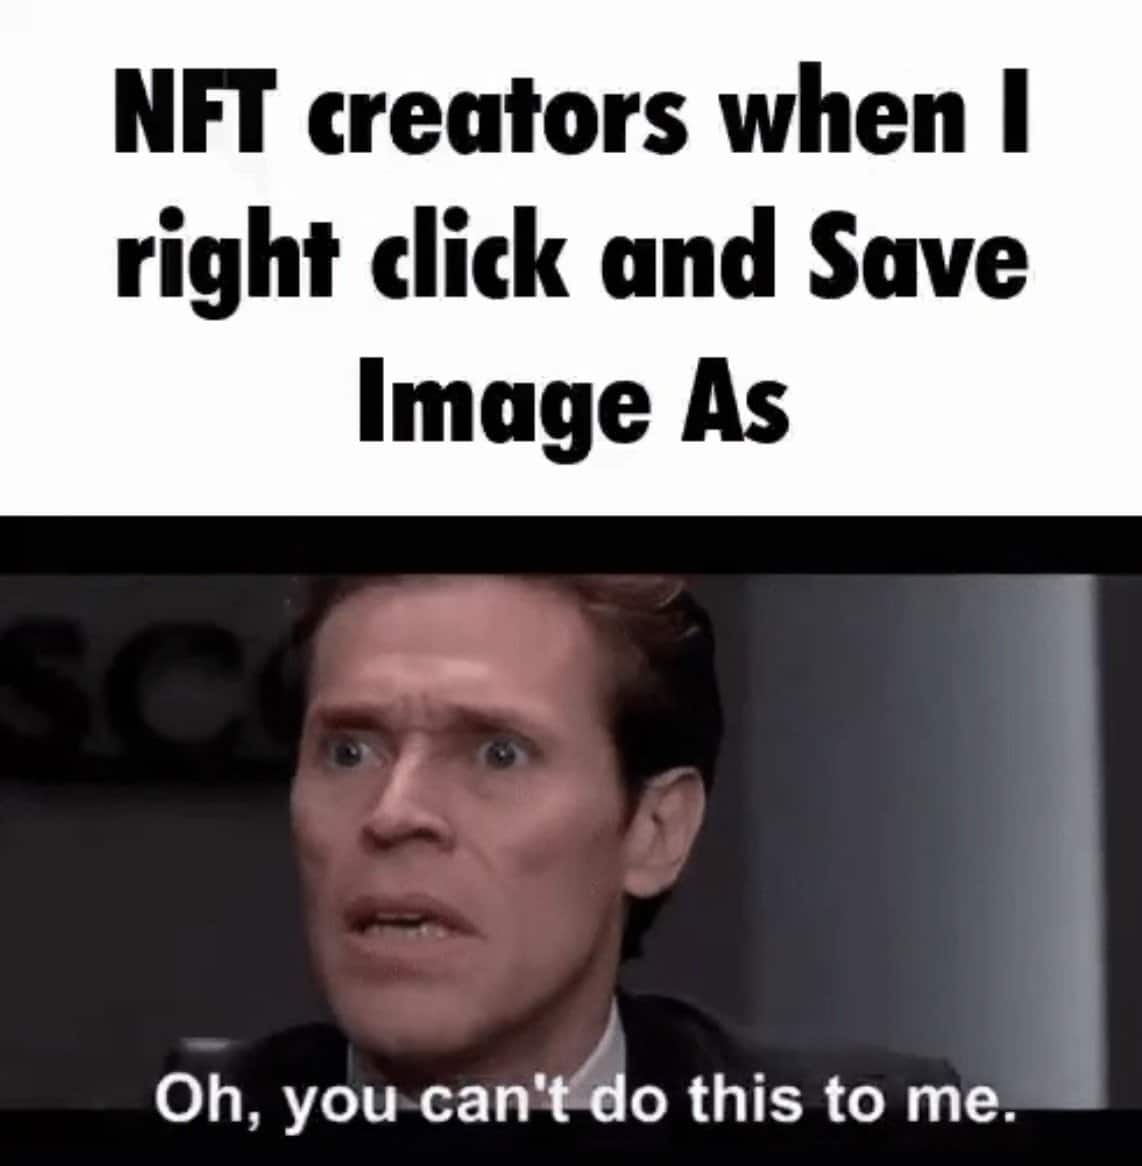 NFT meme featuring Willem Dafoe's character from Spiderman saying "Oh, you can't do this to me."